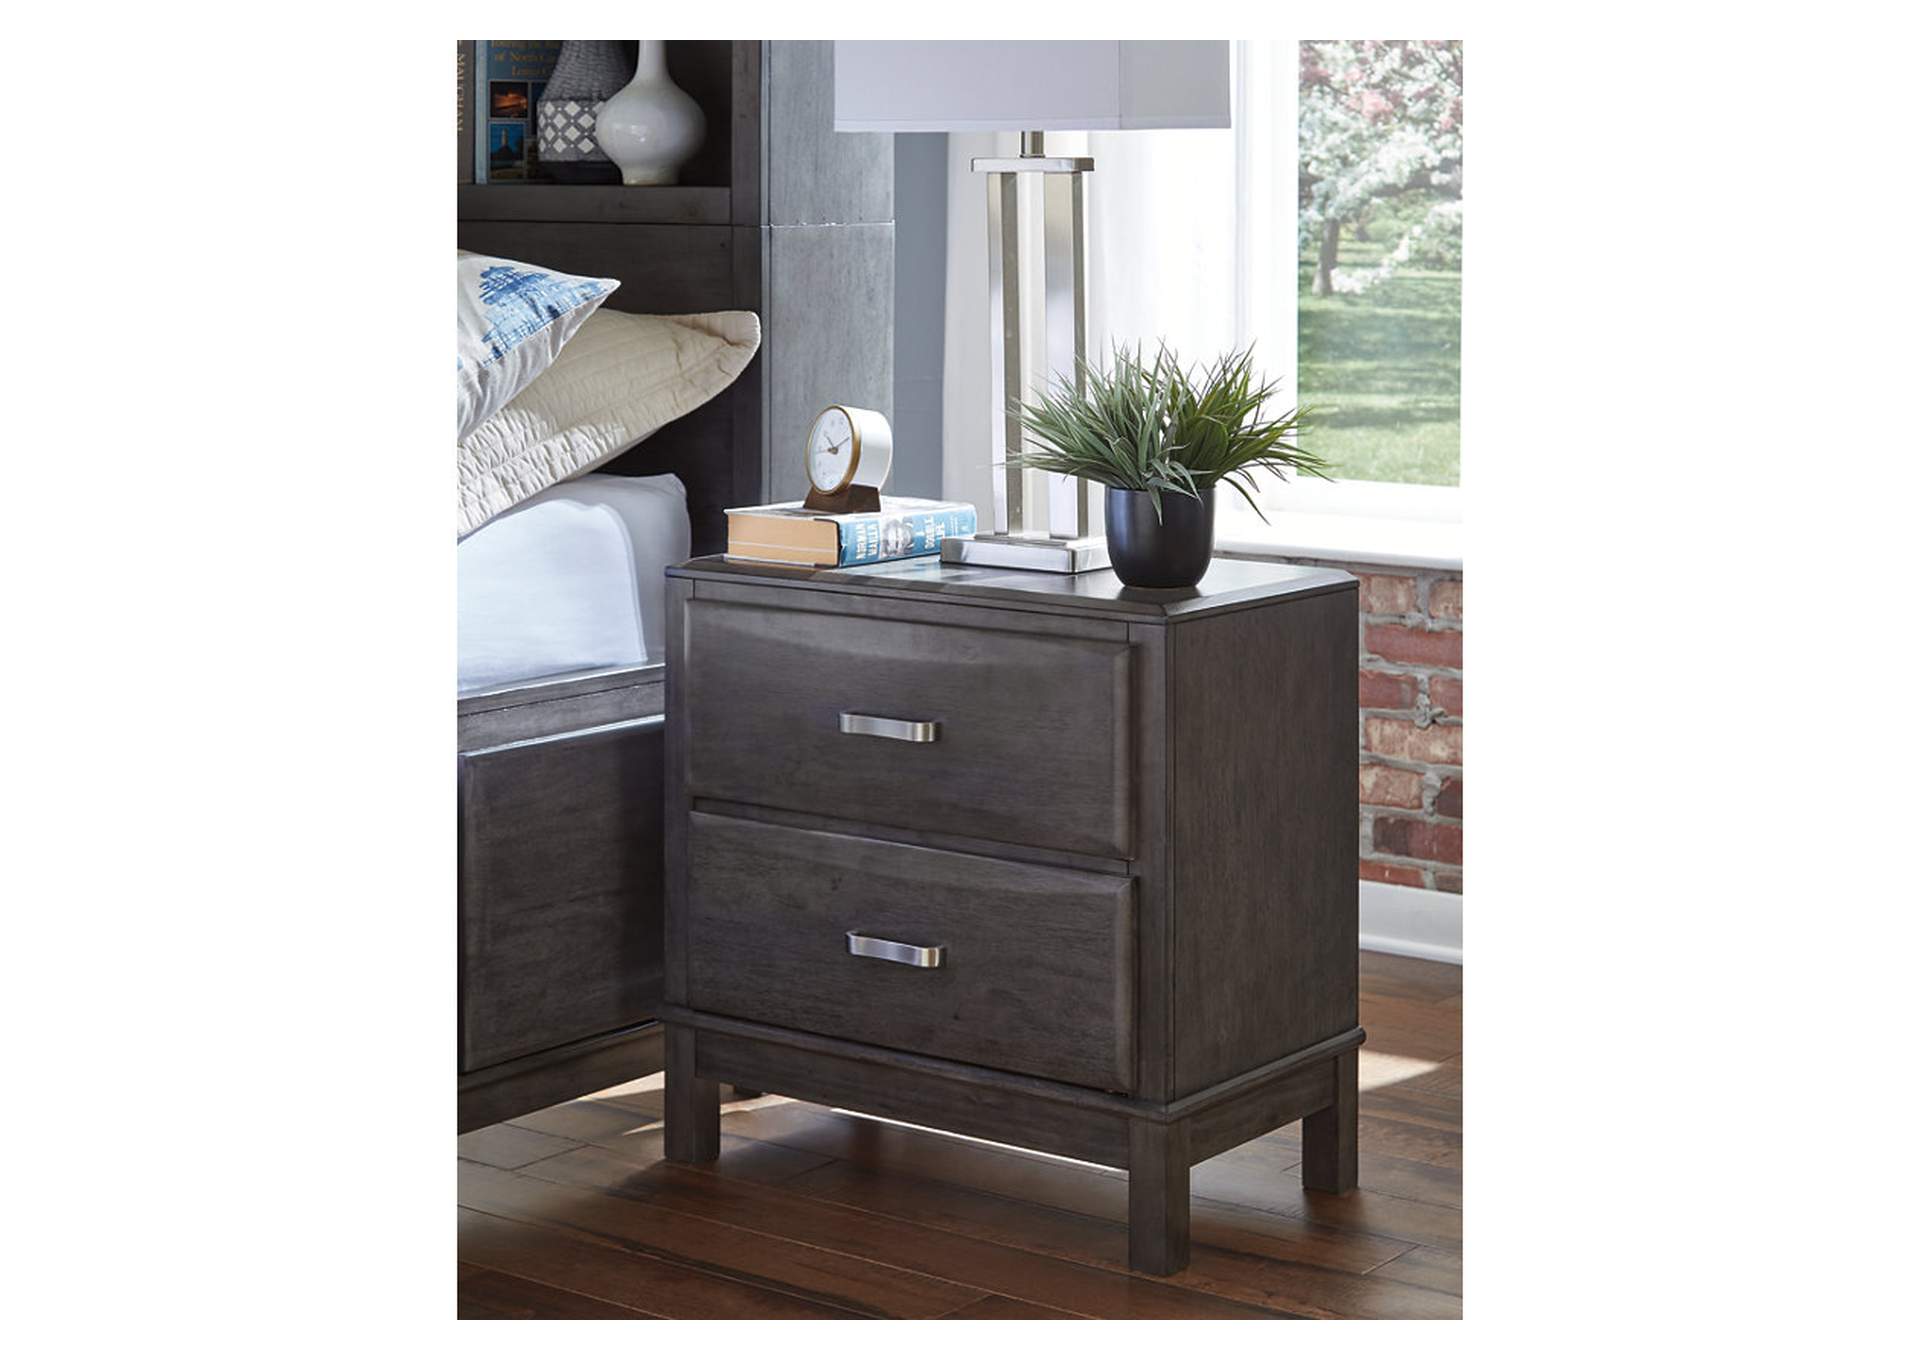 Caitbrook King Storage Bed, Dresser and 2 Nightstands,Signature Design By Ashley